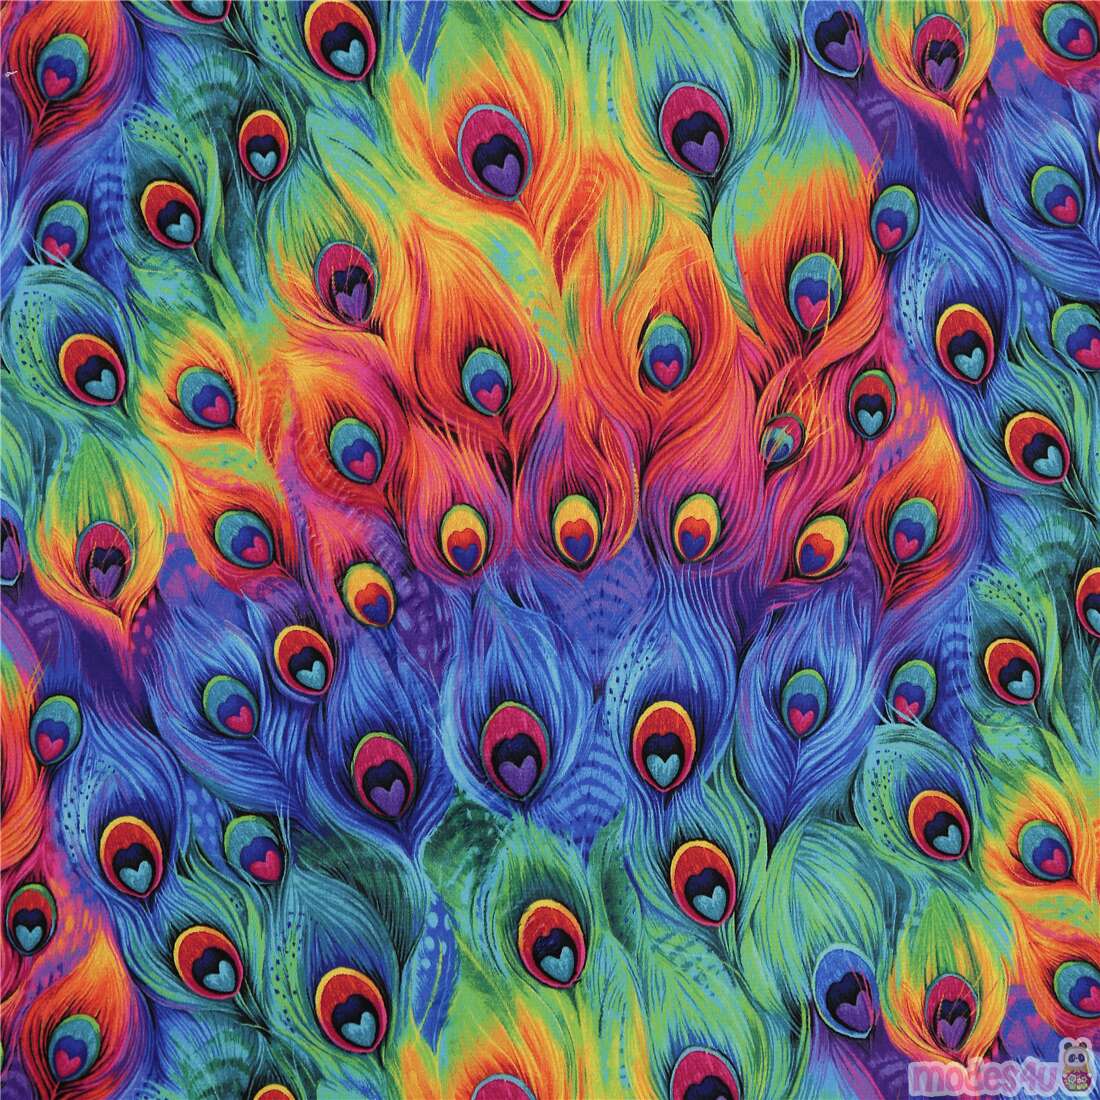 Rainbow Peacock Feathers Super Soft Cuddly Fabric by Timeless Treasures -  modeS4u